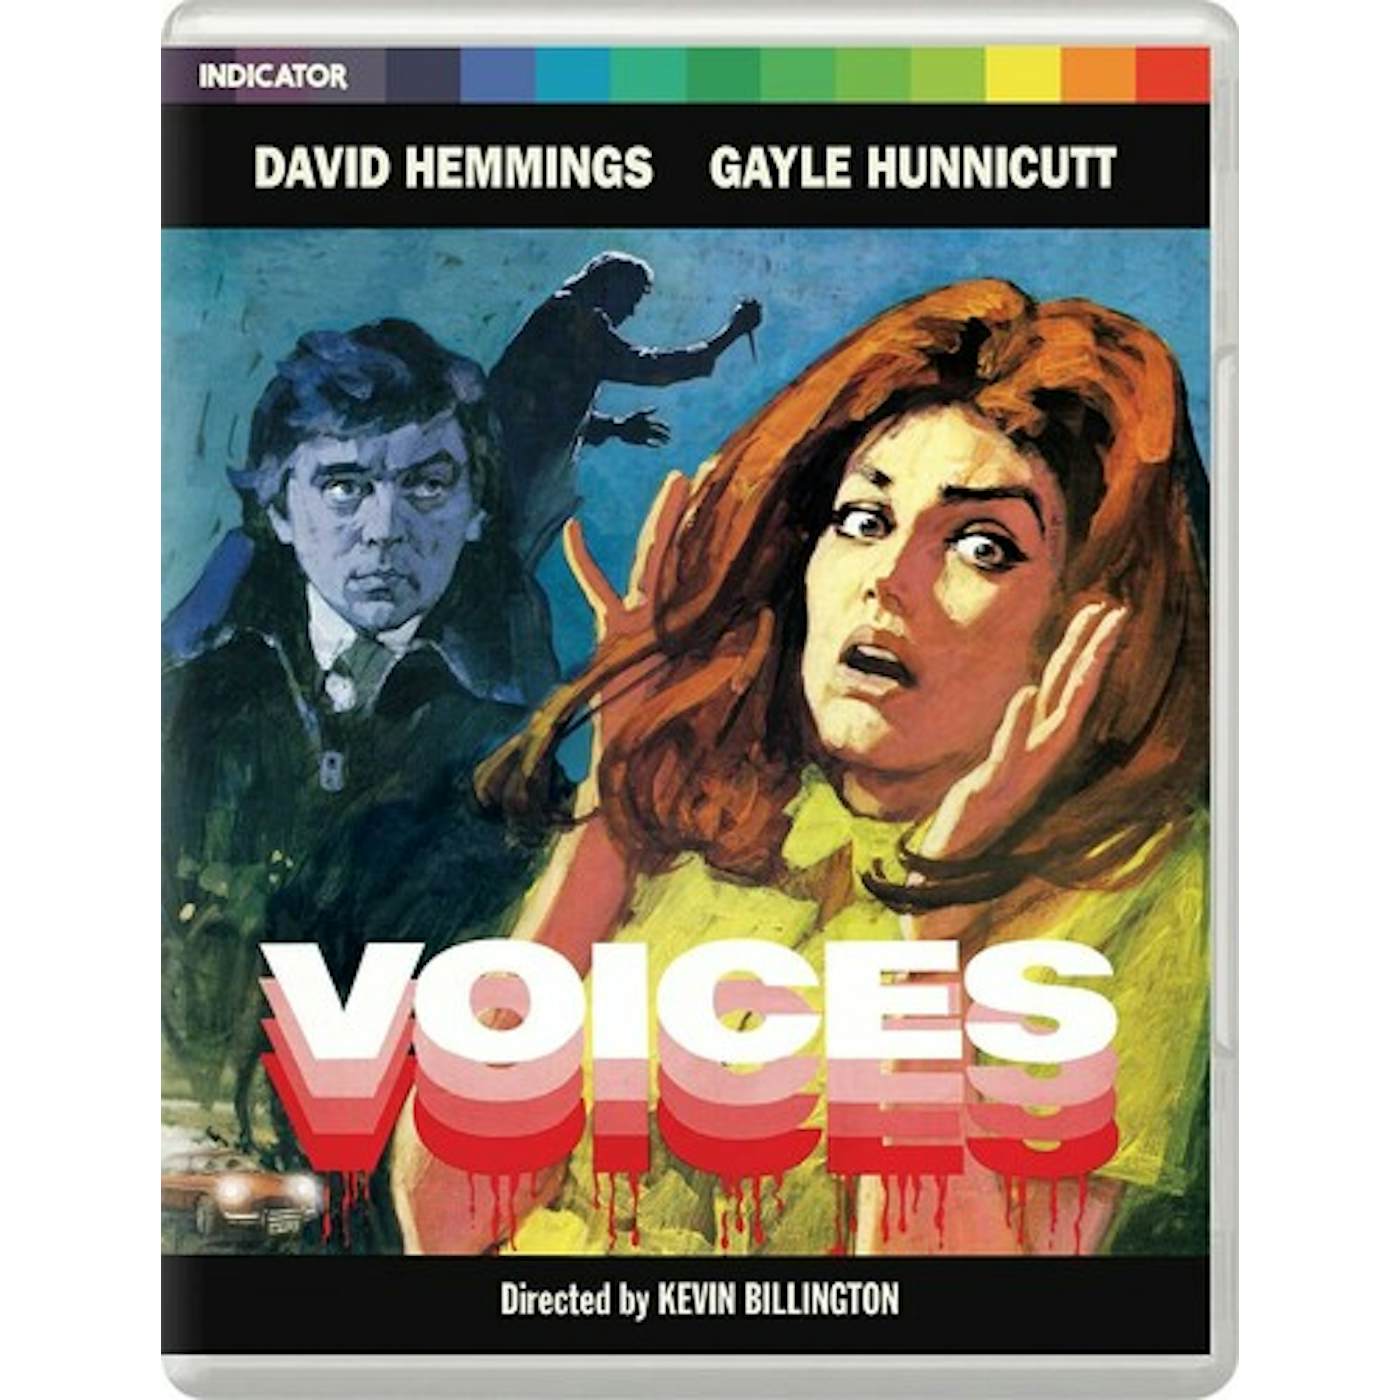 The Voices (US LIMITED EDITION) Blu-ray